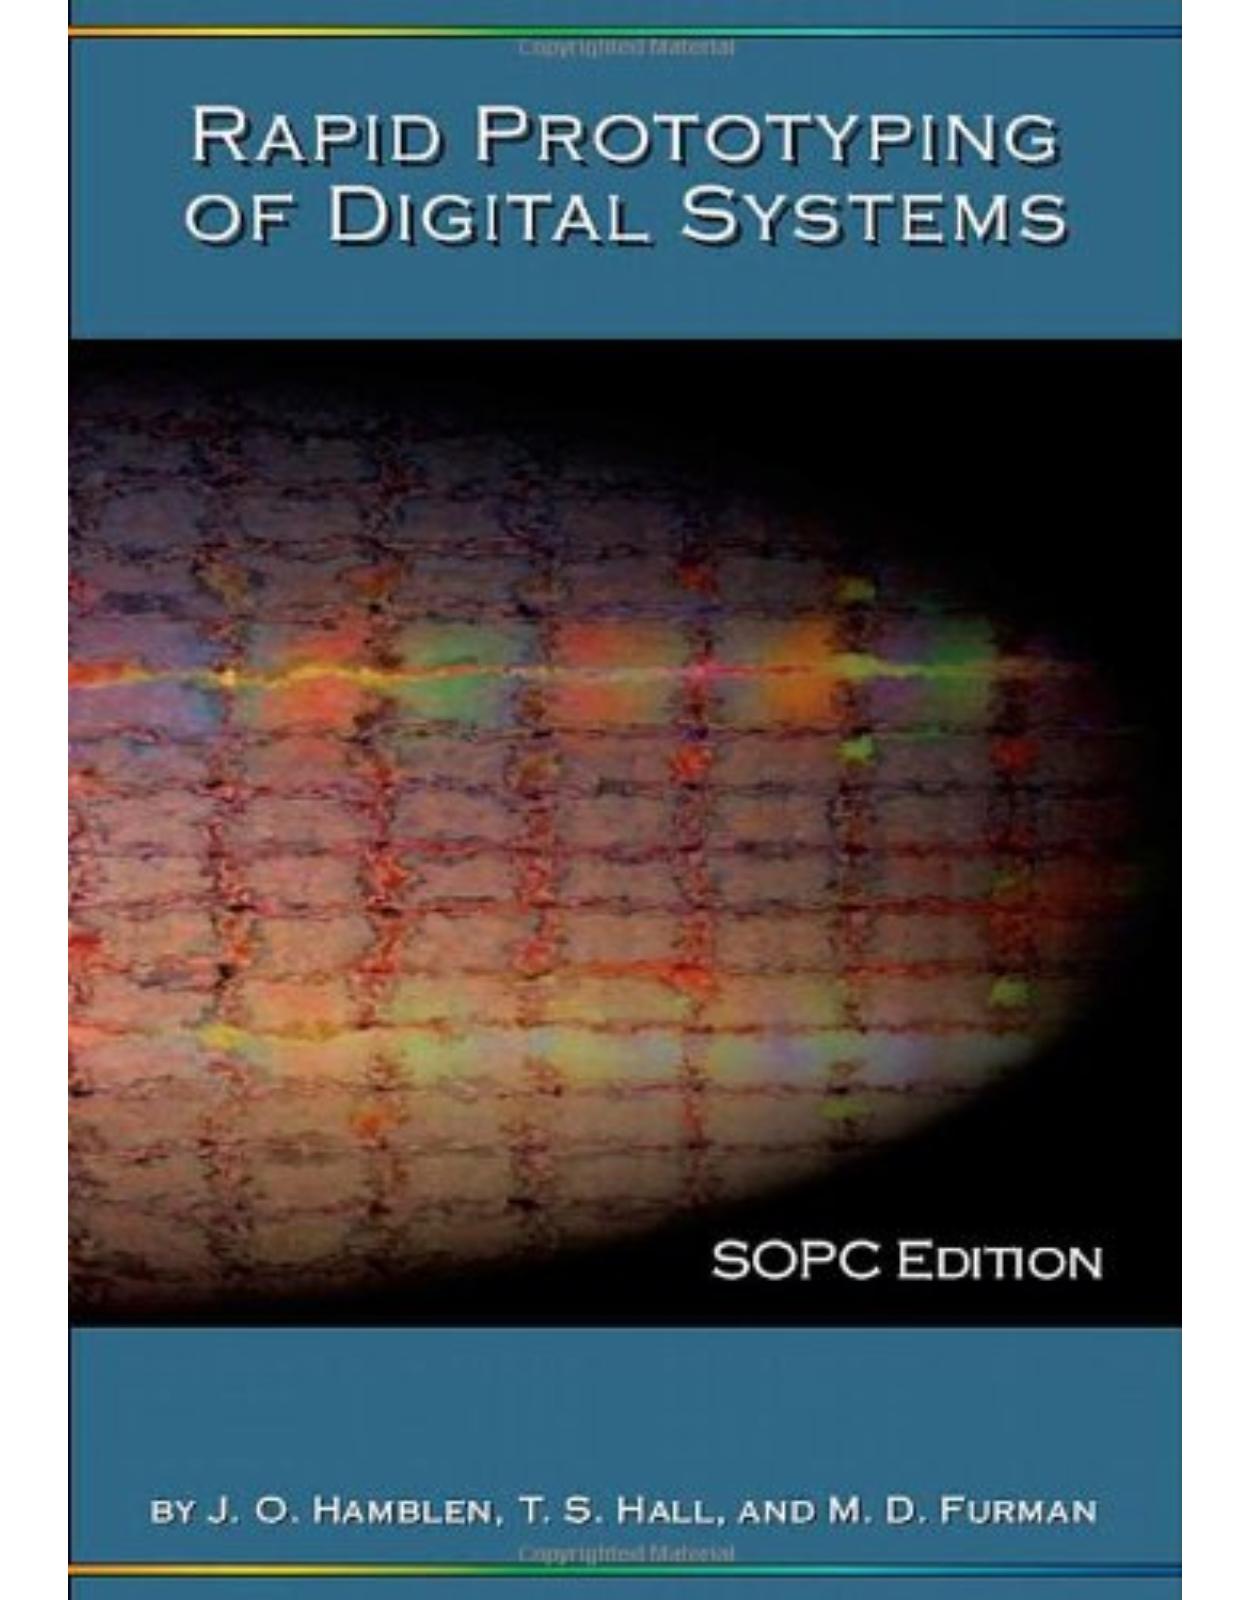 Rapid Prototyping of Digital Systems: Sopc Edition